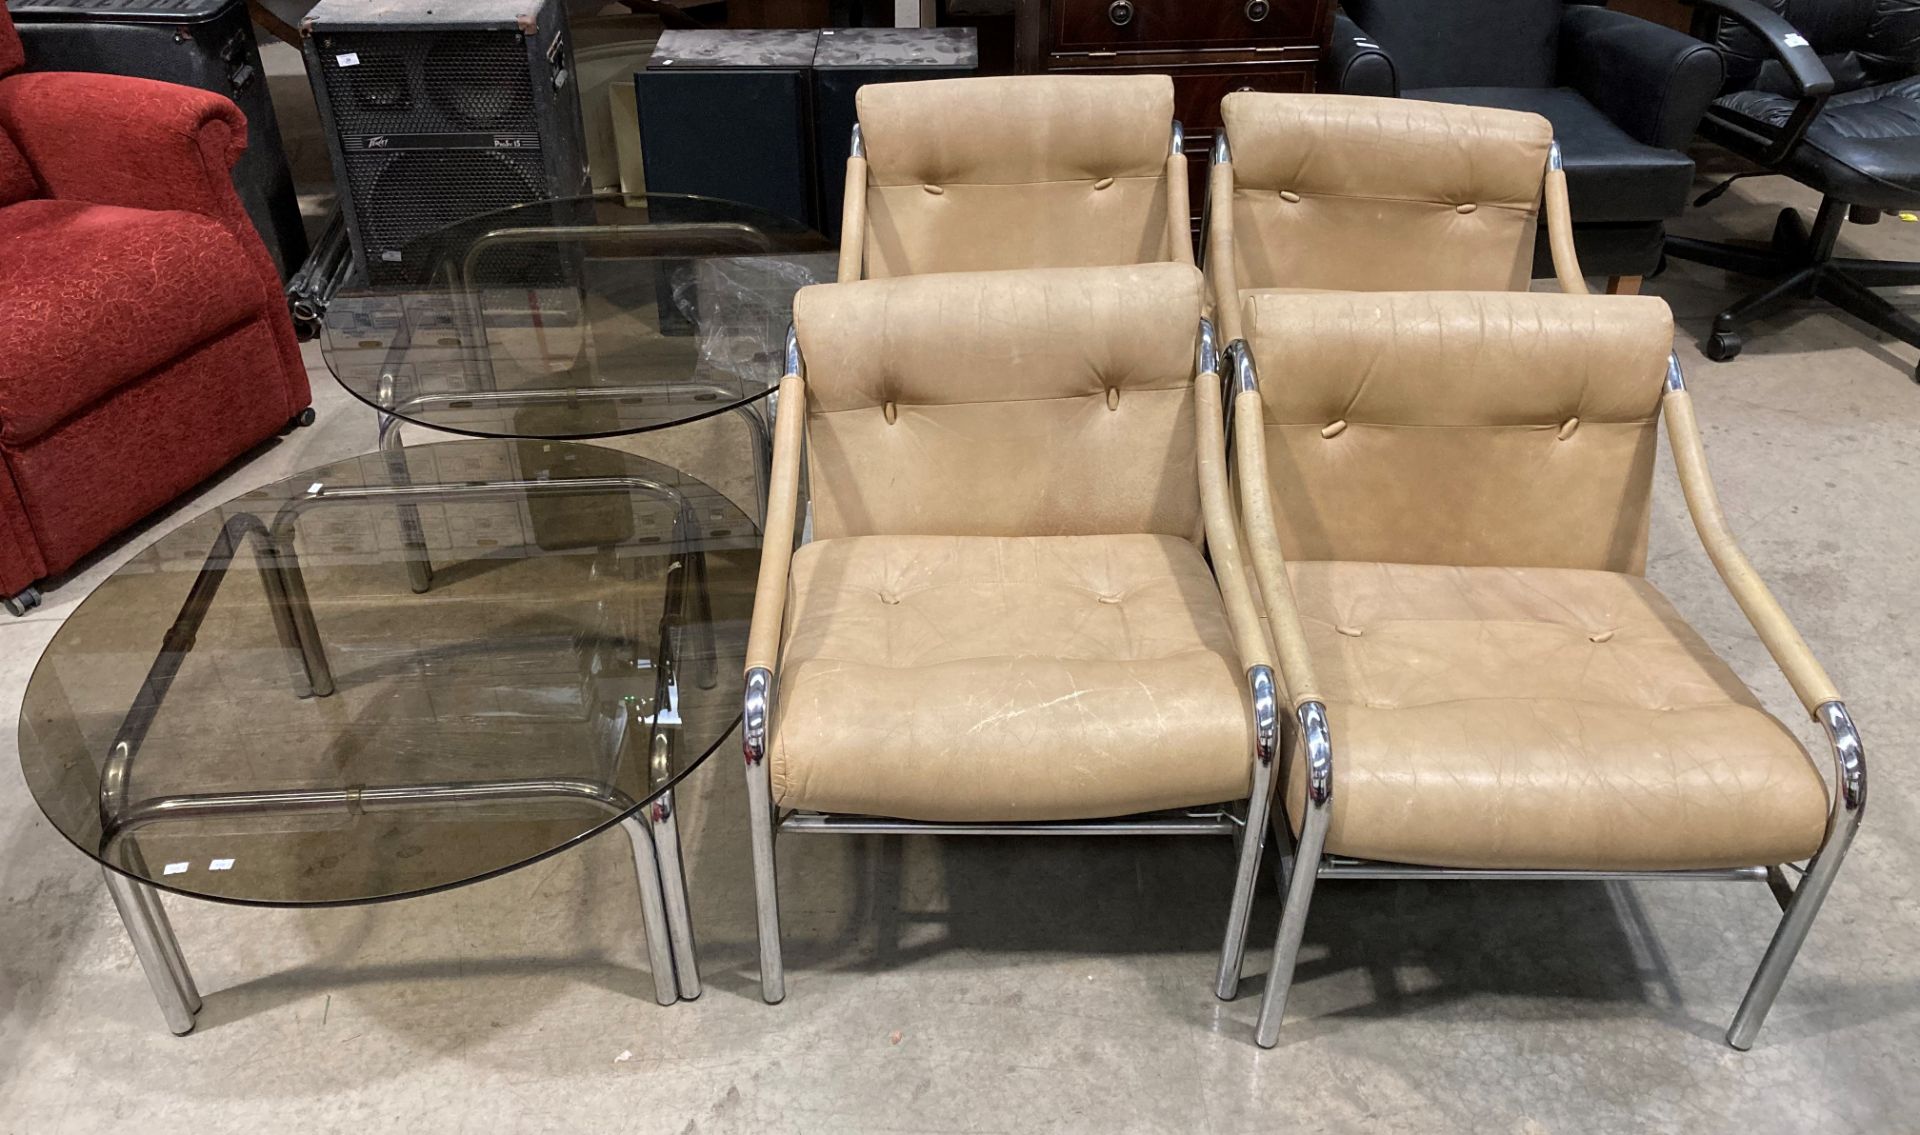 A 1970s vintage set of four chrome framed studio lounge chairs in light tan leather made by Pirelli,